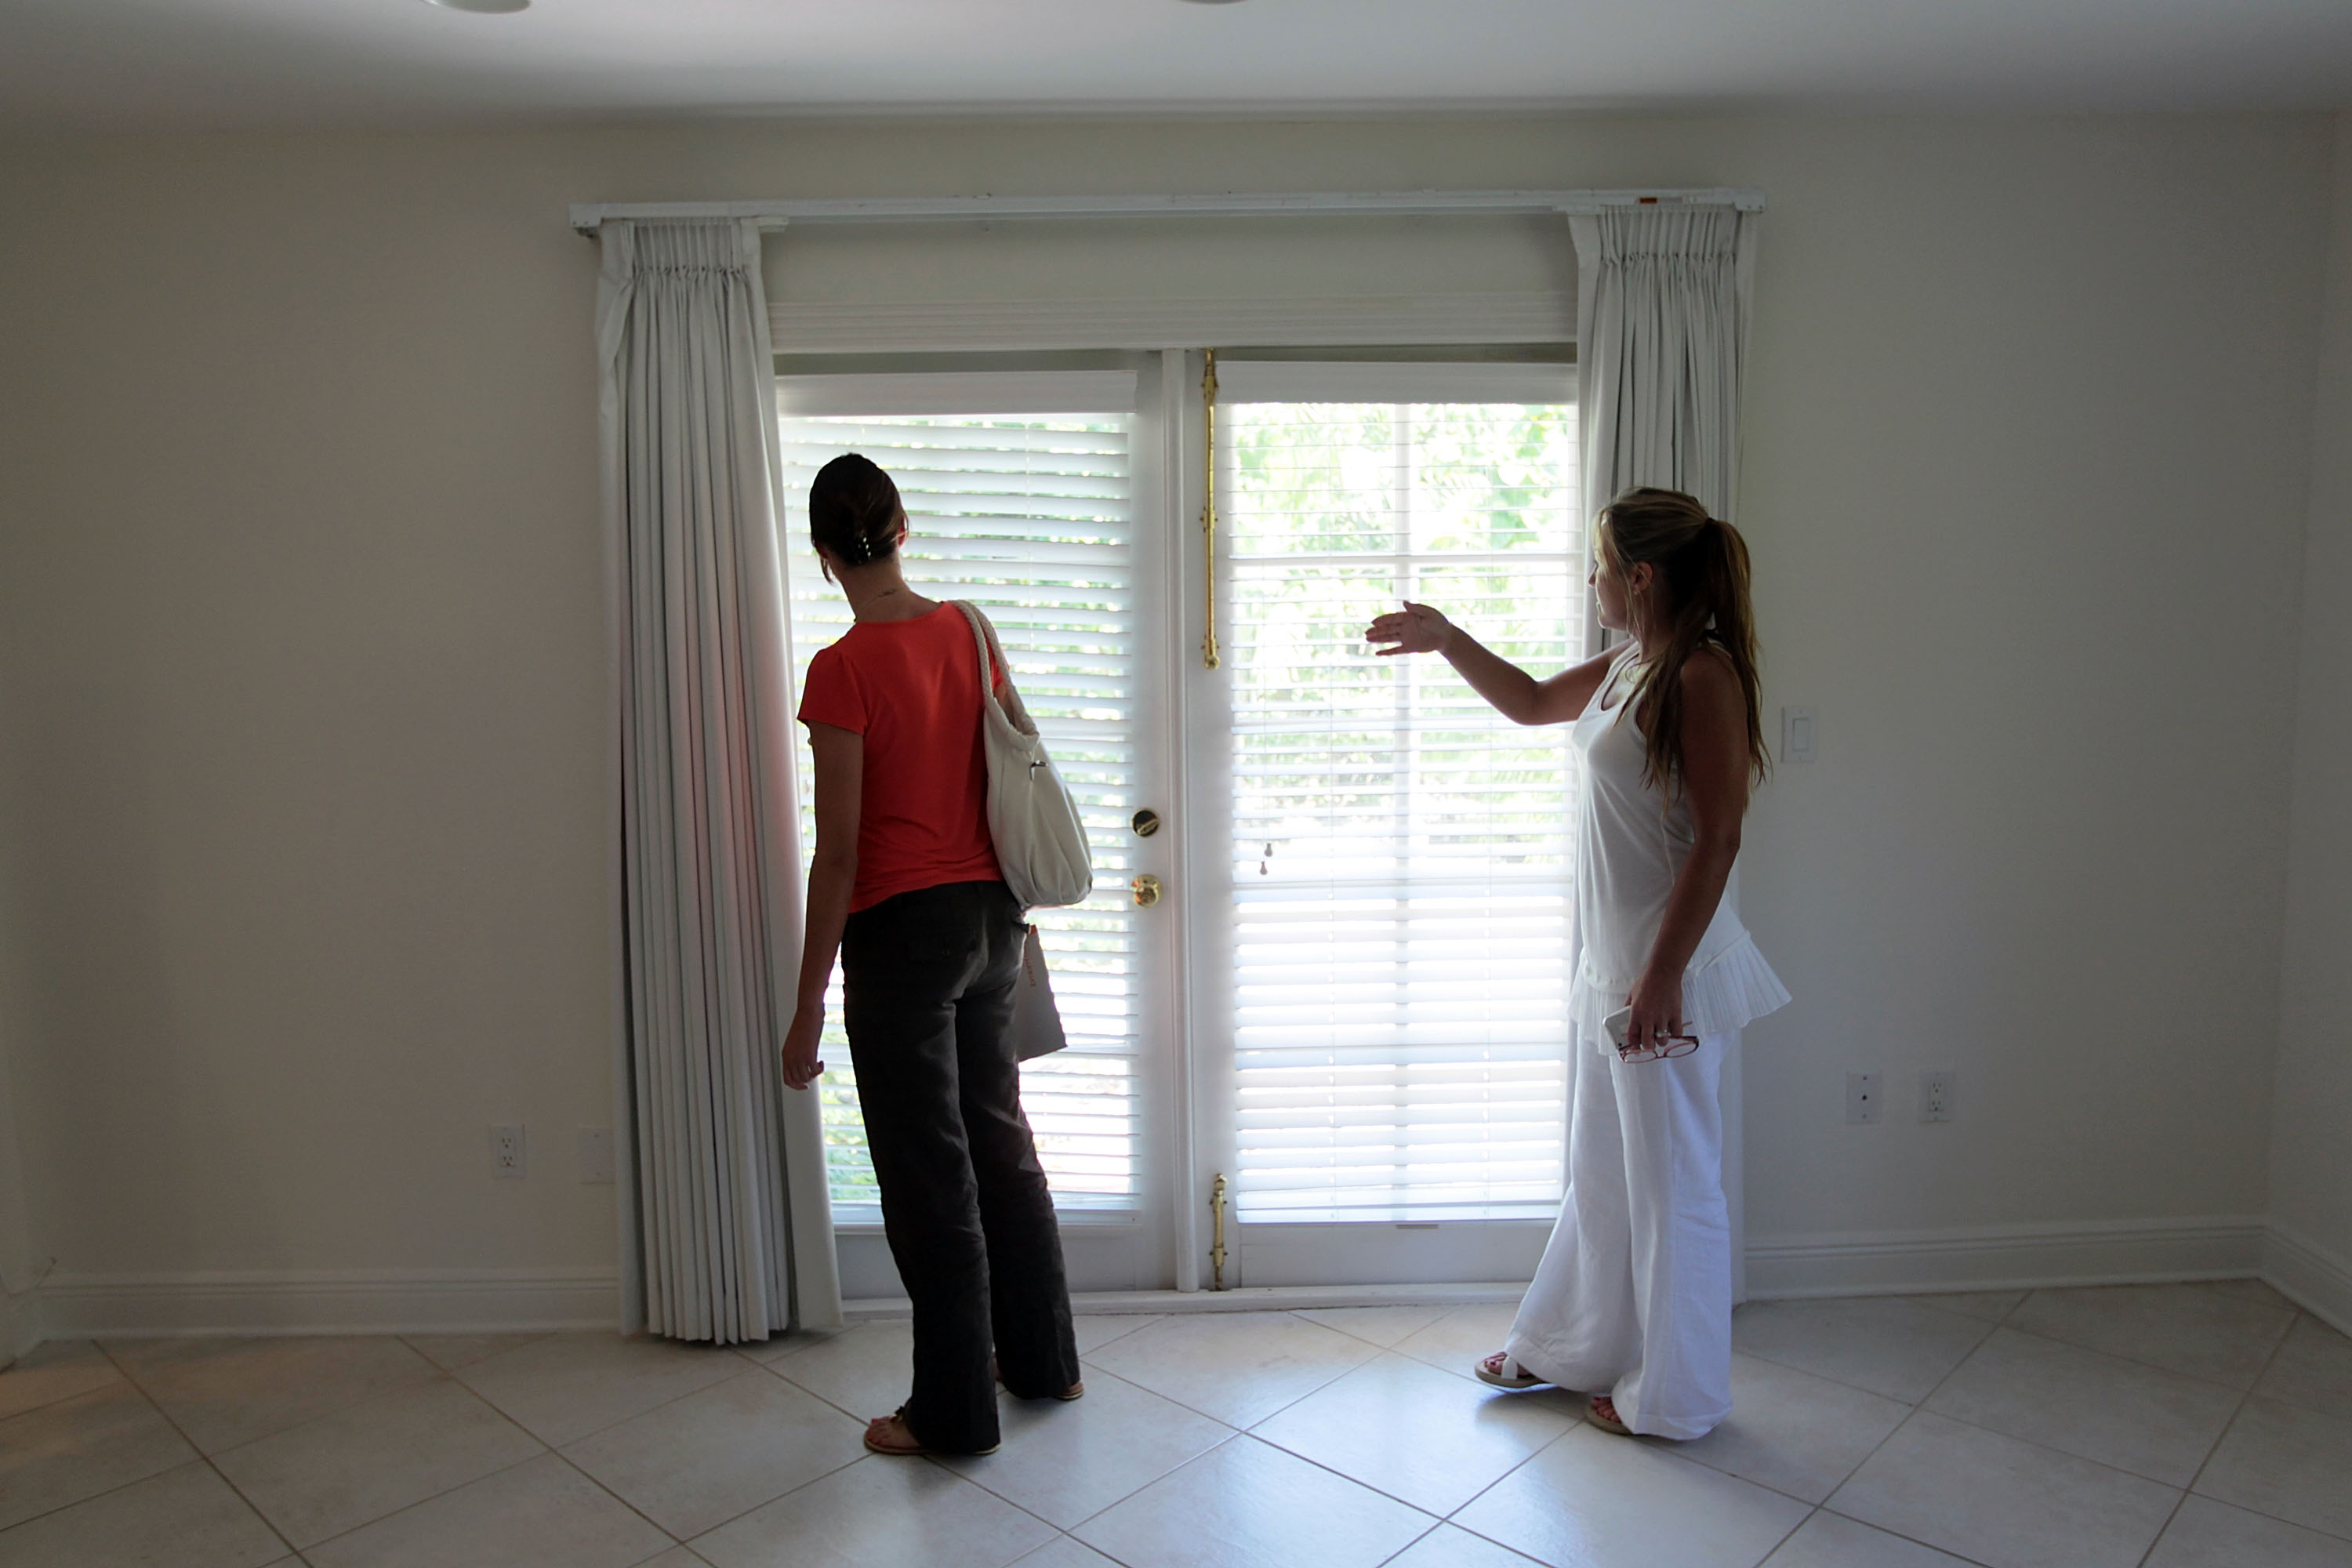 A real estate agent&nbsp;shows a home to a potential buyer&nbsp;in Miami, Florida.